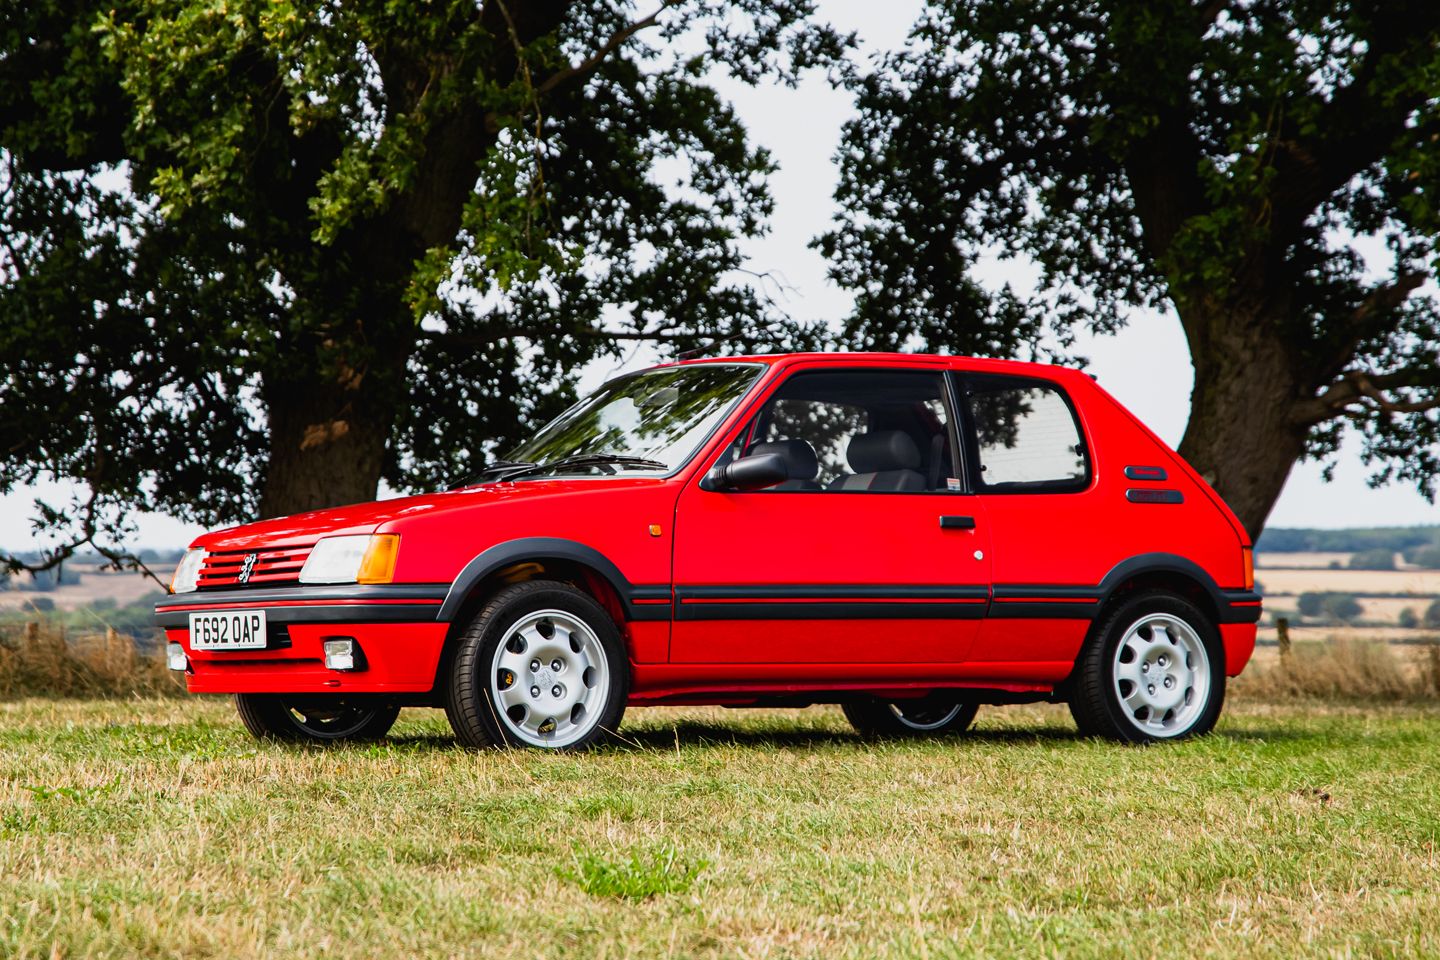 This is the first customer Tolman Edition Peugeot 205 GTI